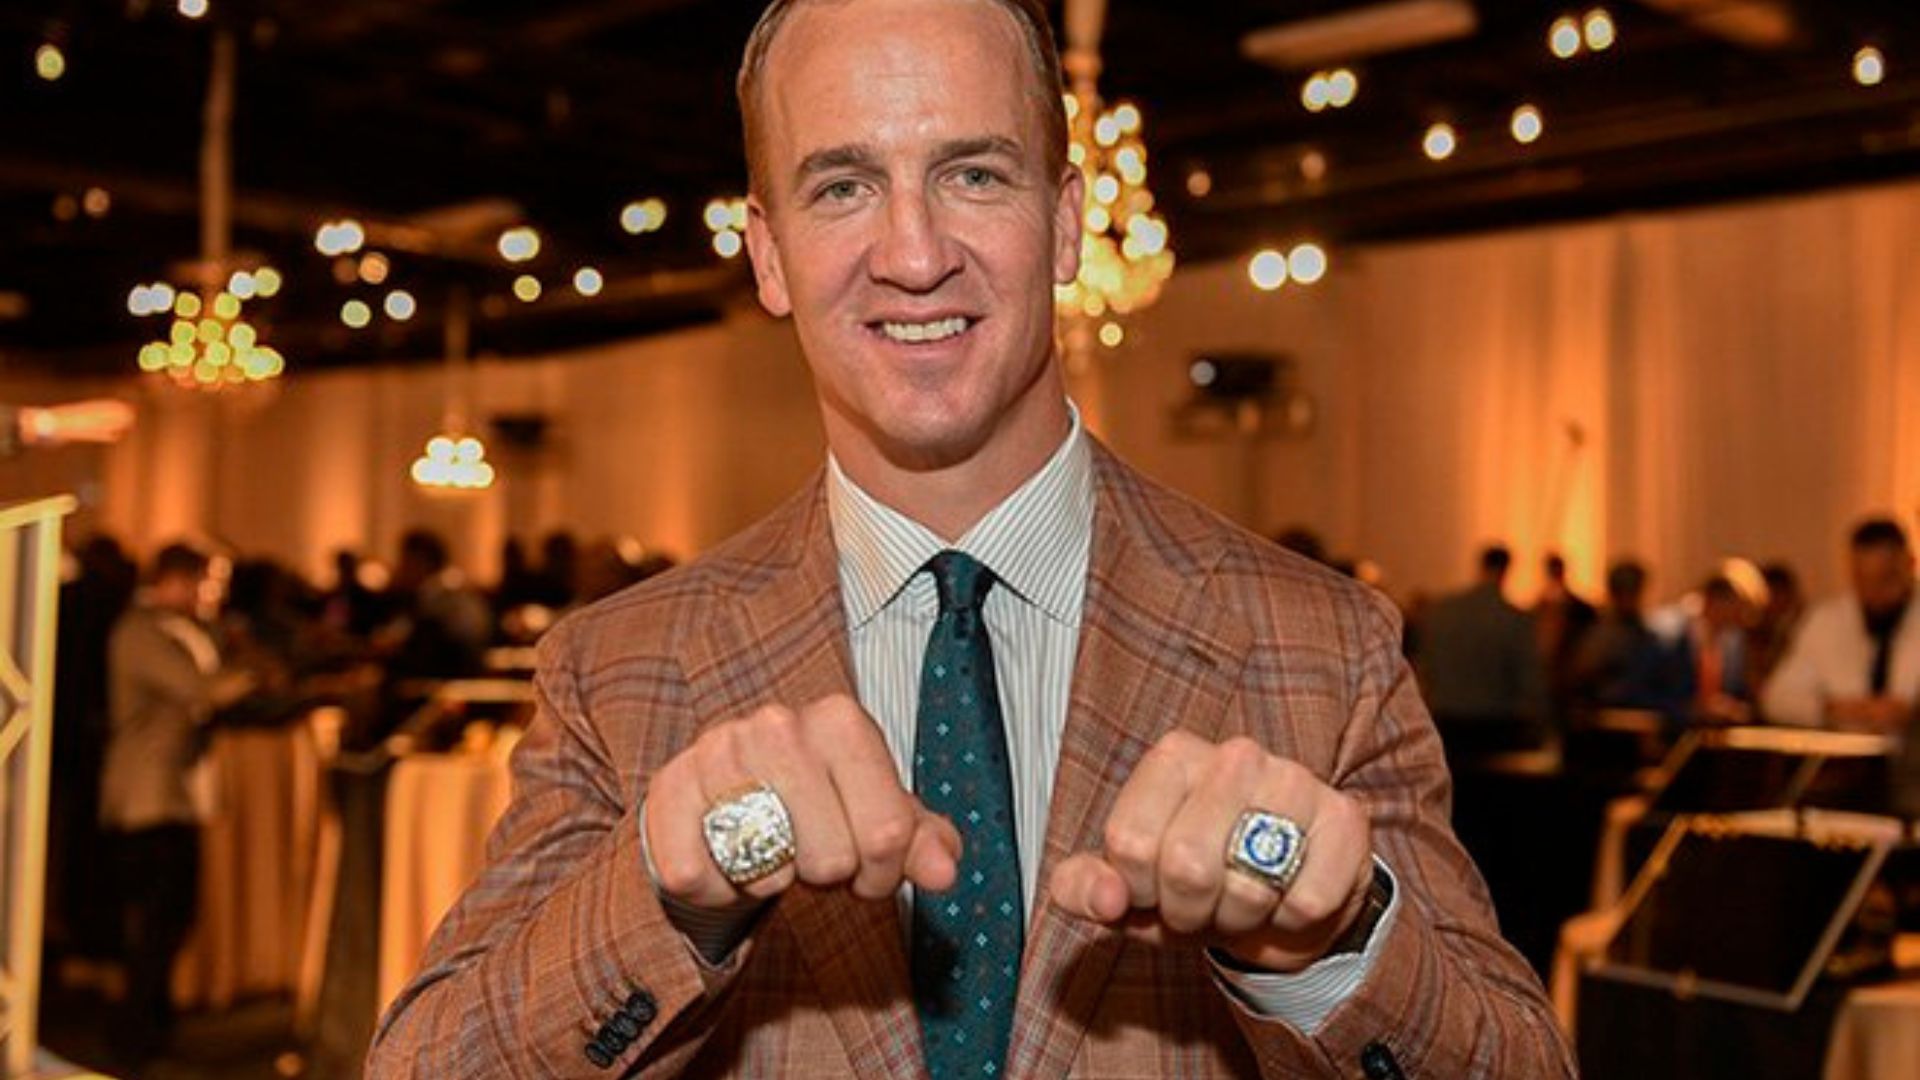 How Many Rings Does Peyton Manning Have